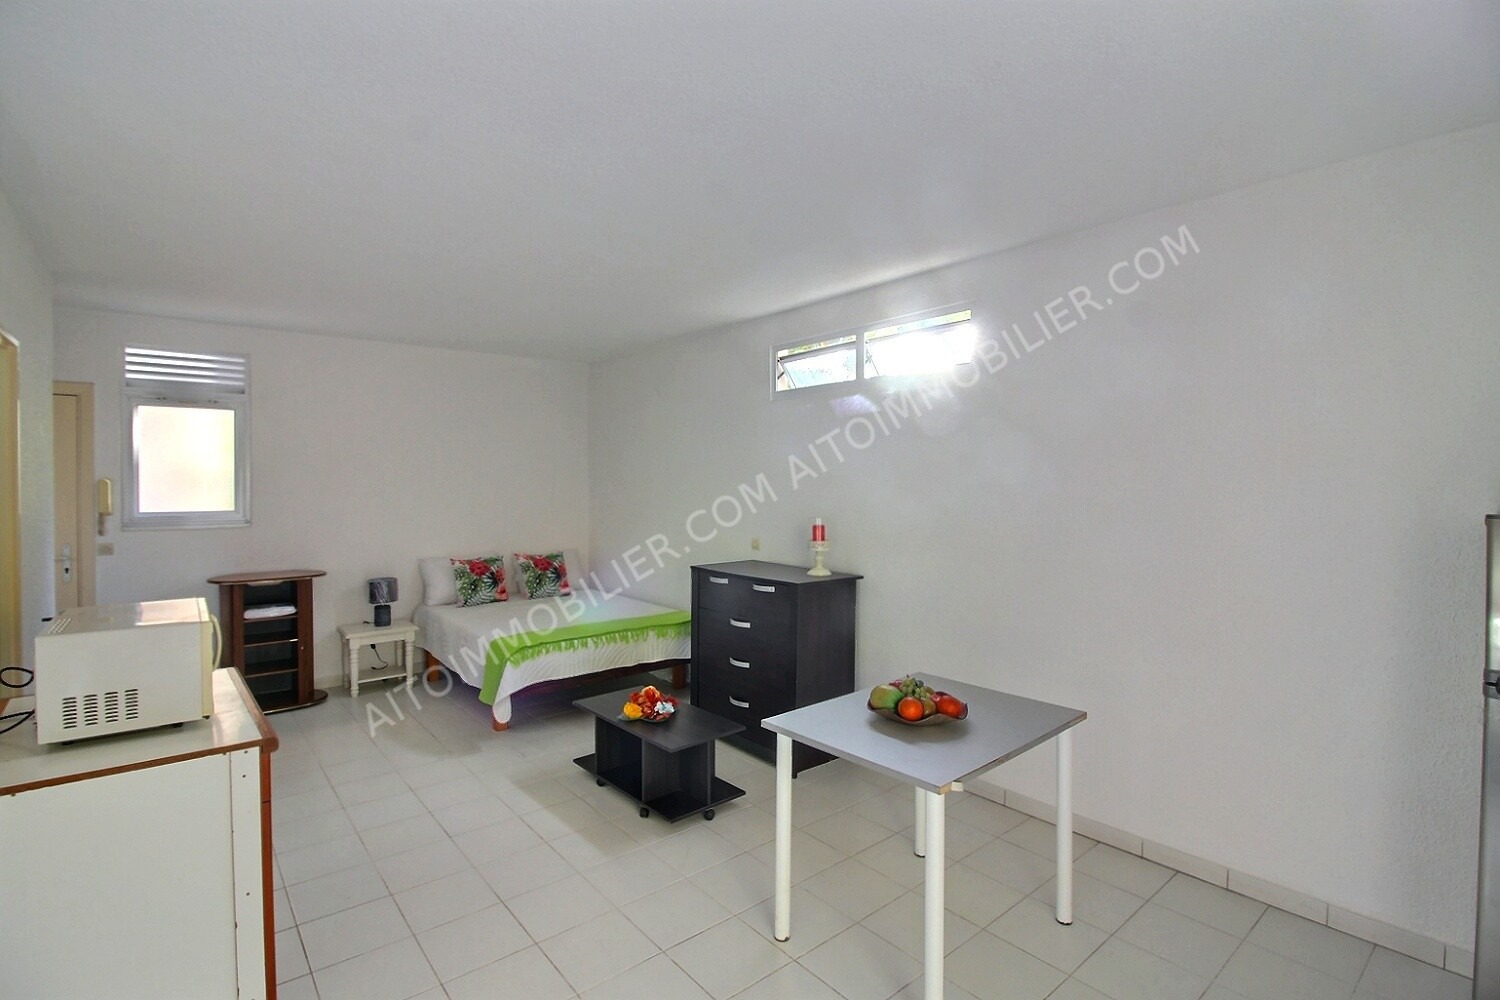 LOCATION APPARTEMENT  PUNAAUIA F1 4